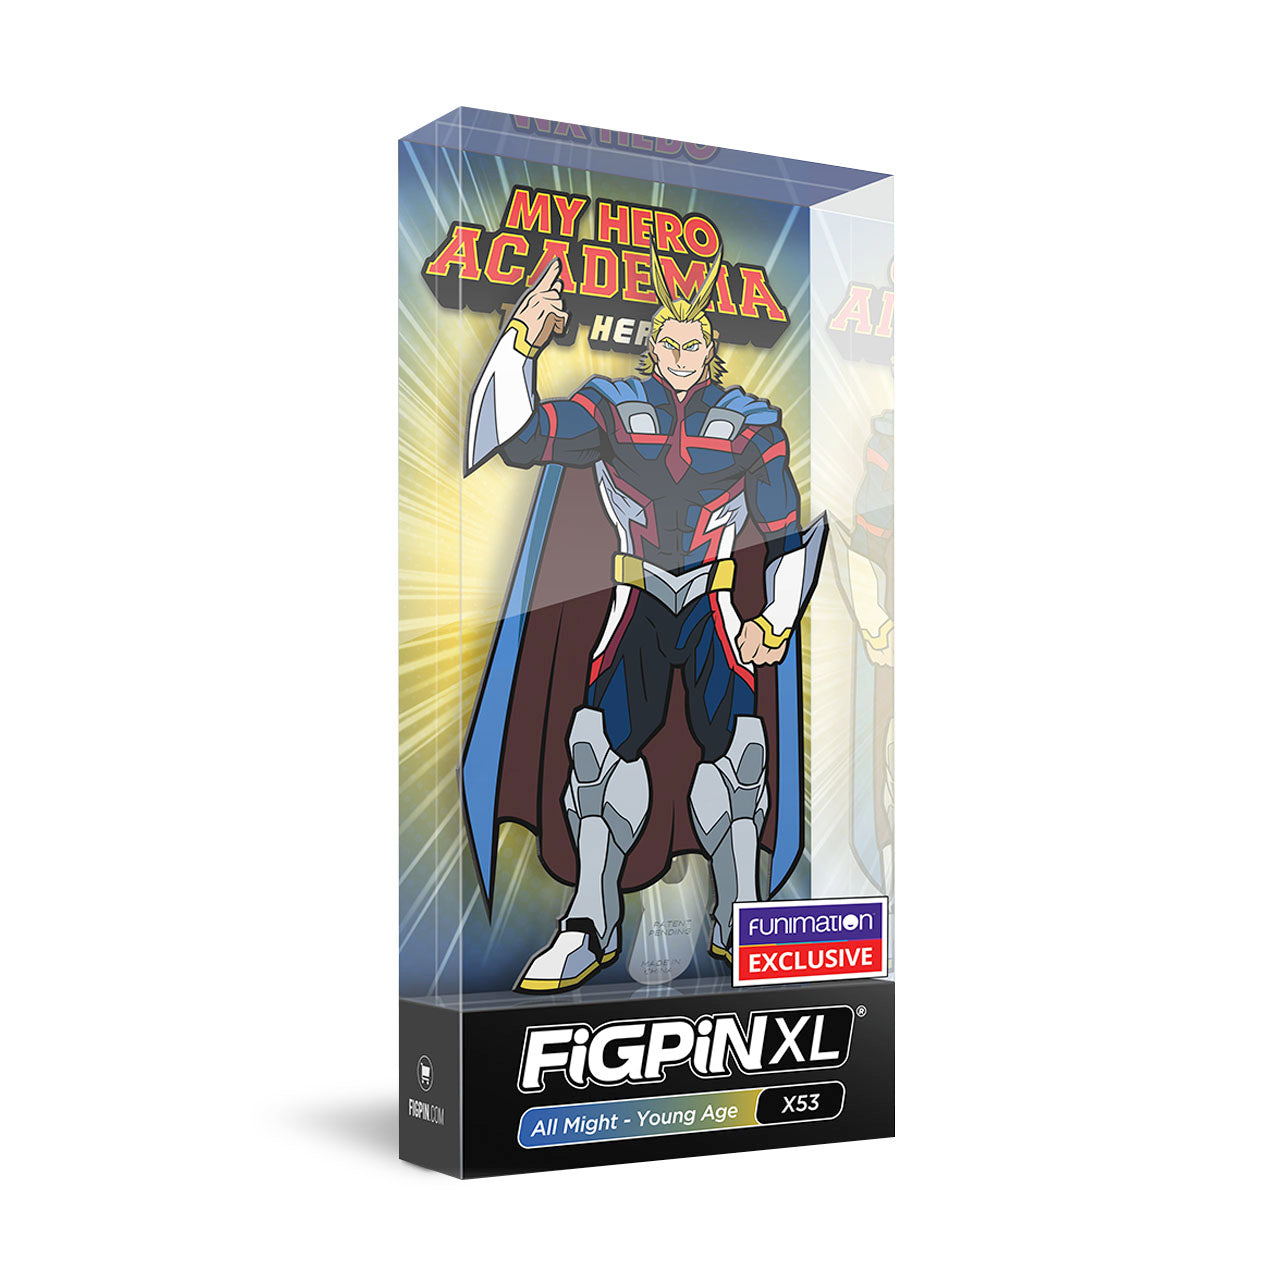 My Hero Academia - All Might - Young Age (#X53) FiGPiN image count 1